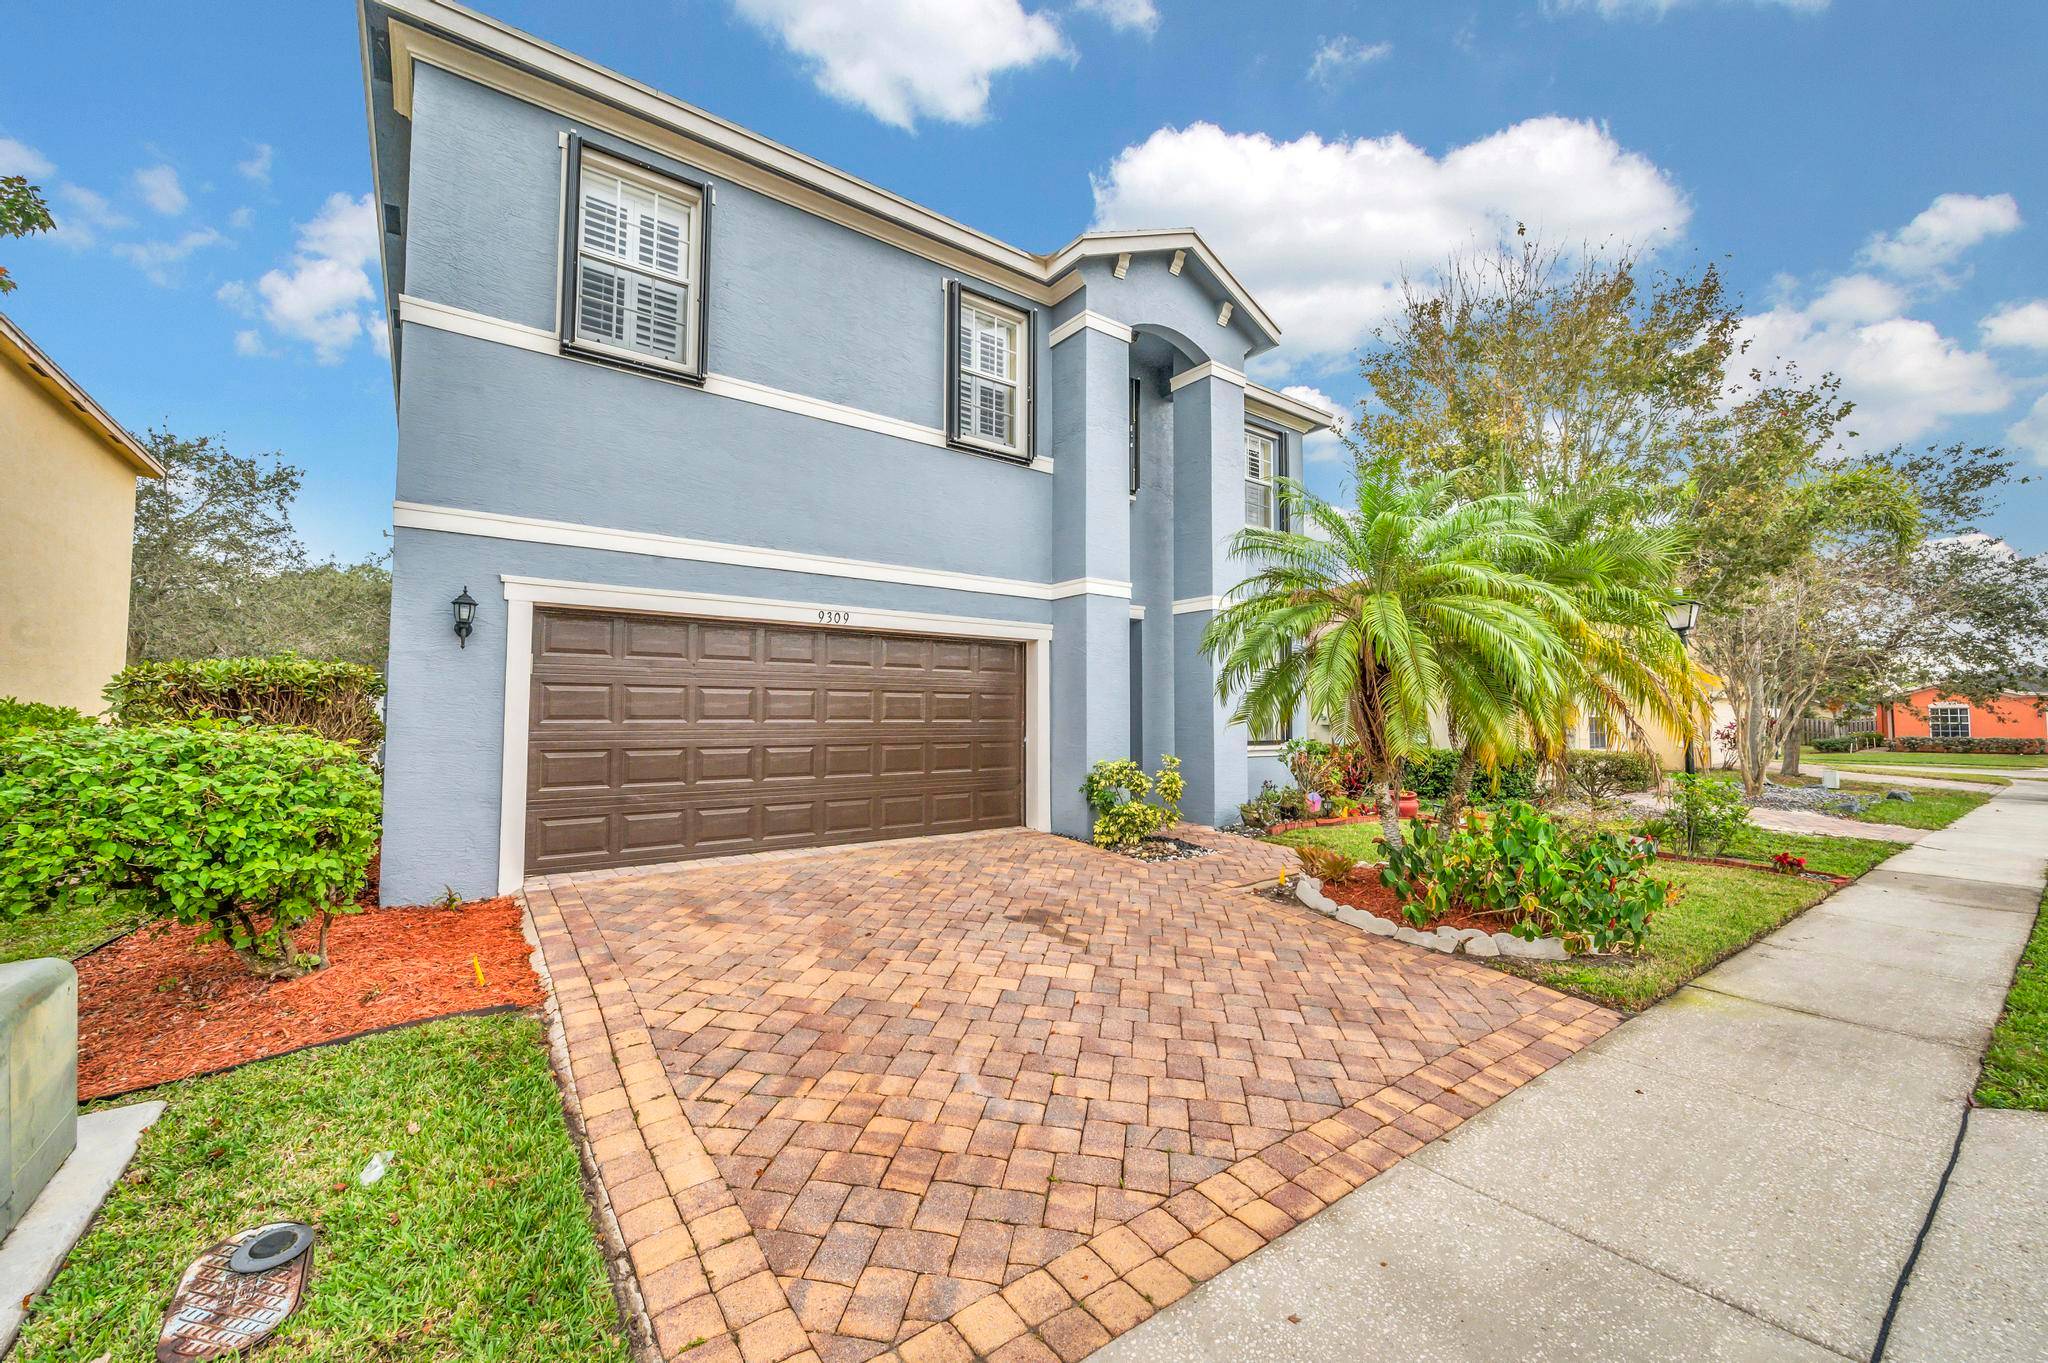 This beautiful two story Florida home features five bedrooms and three bathrooms, providing ample space for a comfortable living experience.